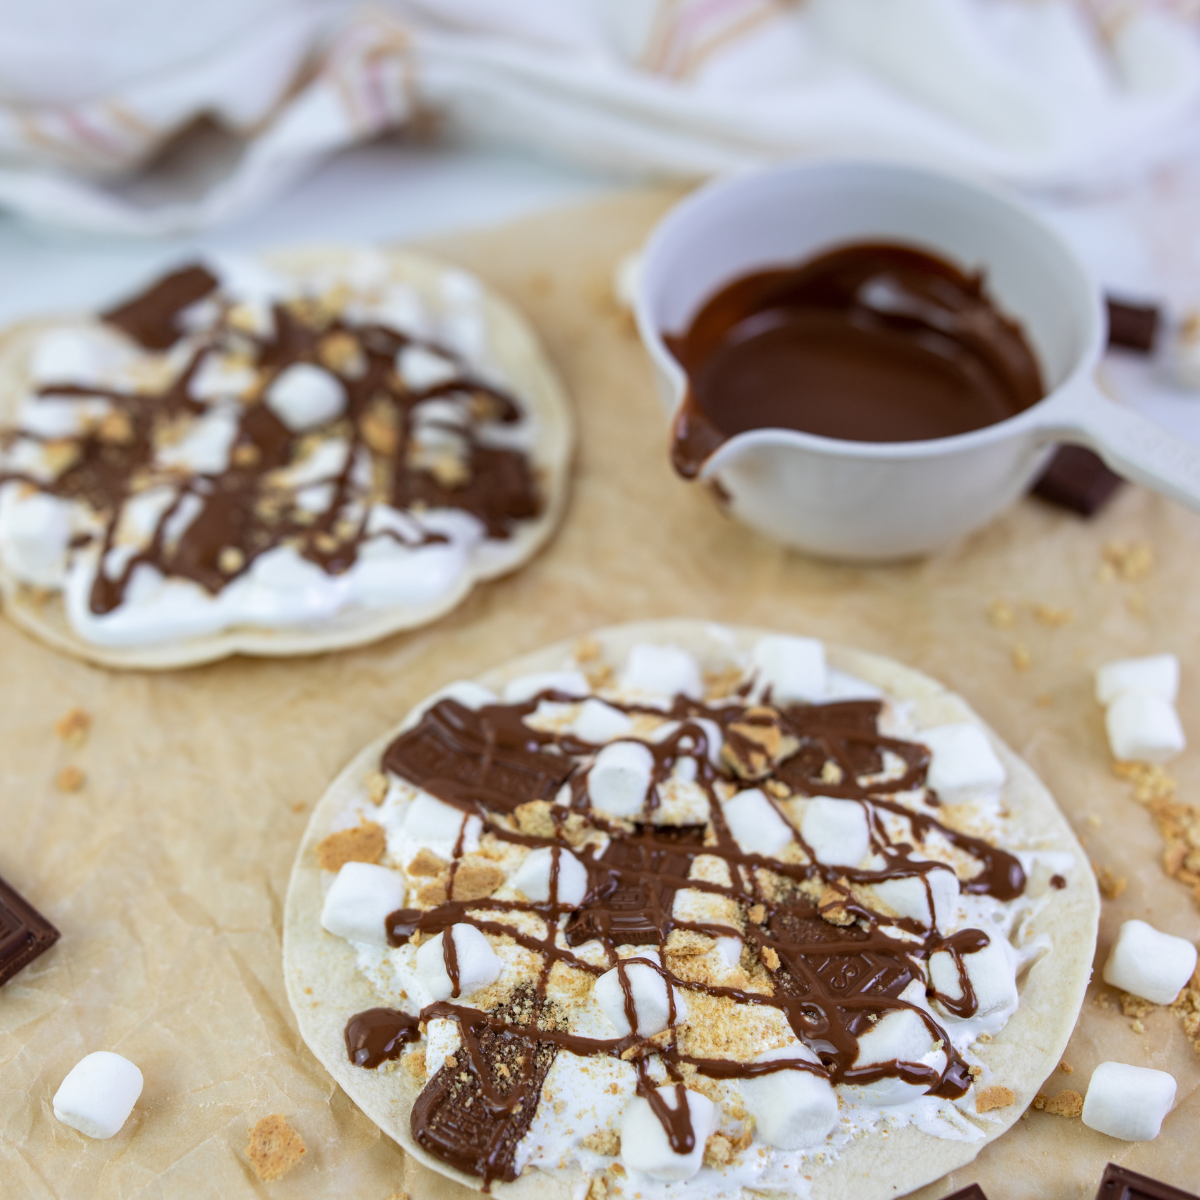 How To Make S'mores Pizza On Blackstone Griddle